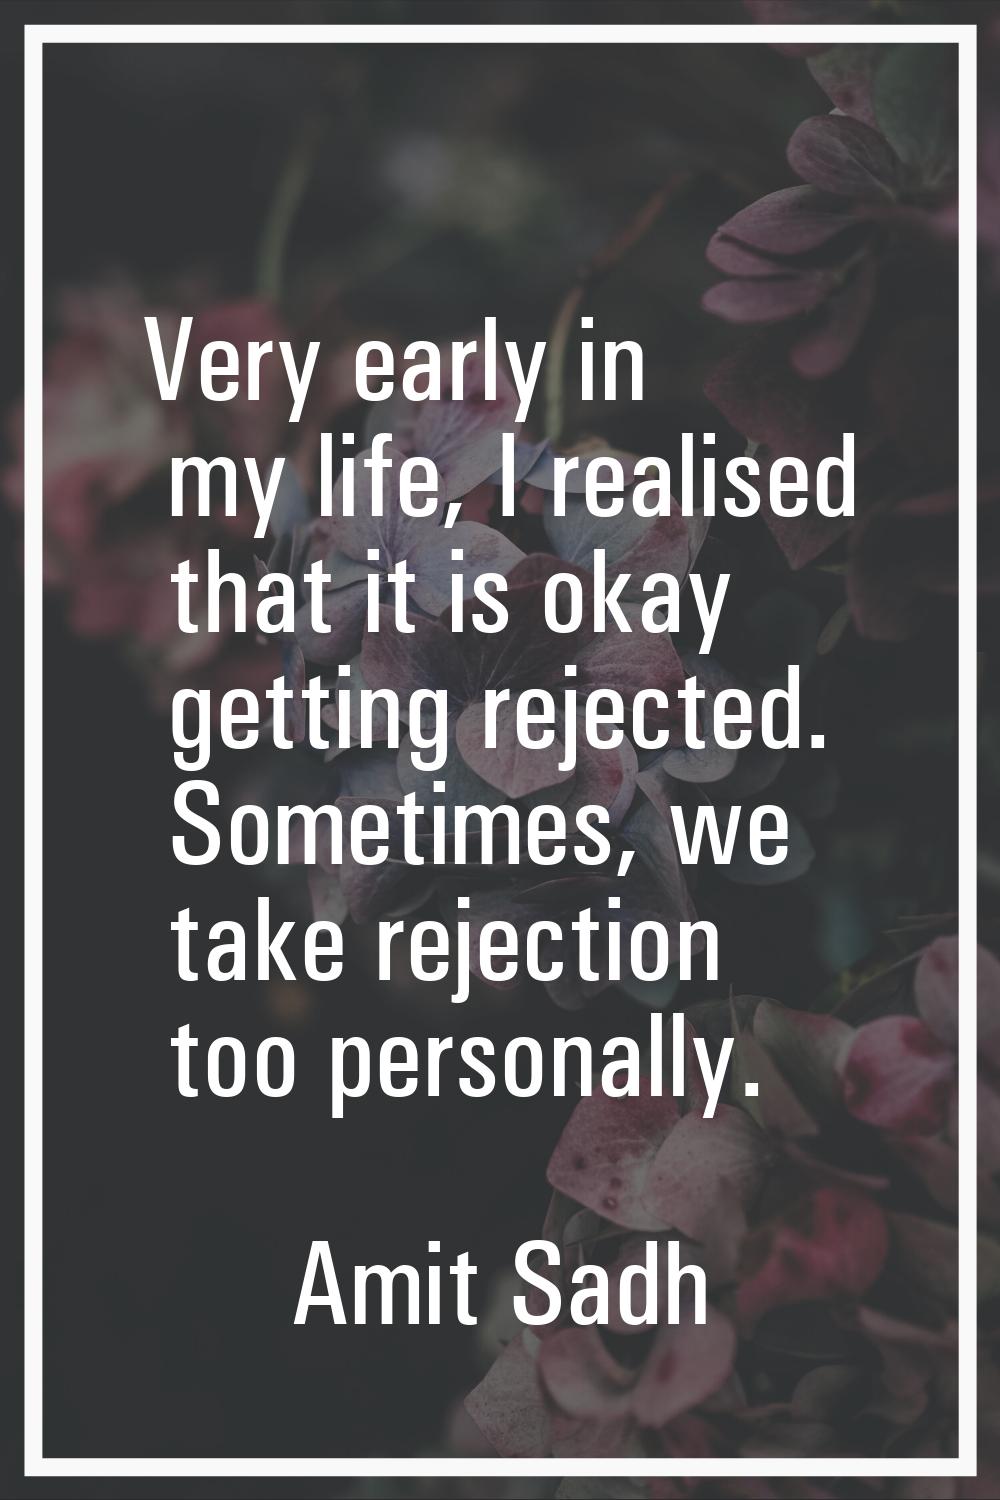 Very early in my life, I realised that it is okay getting rejected. Sometimes, we take rejection to